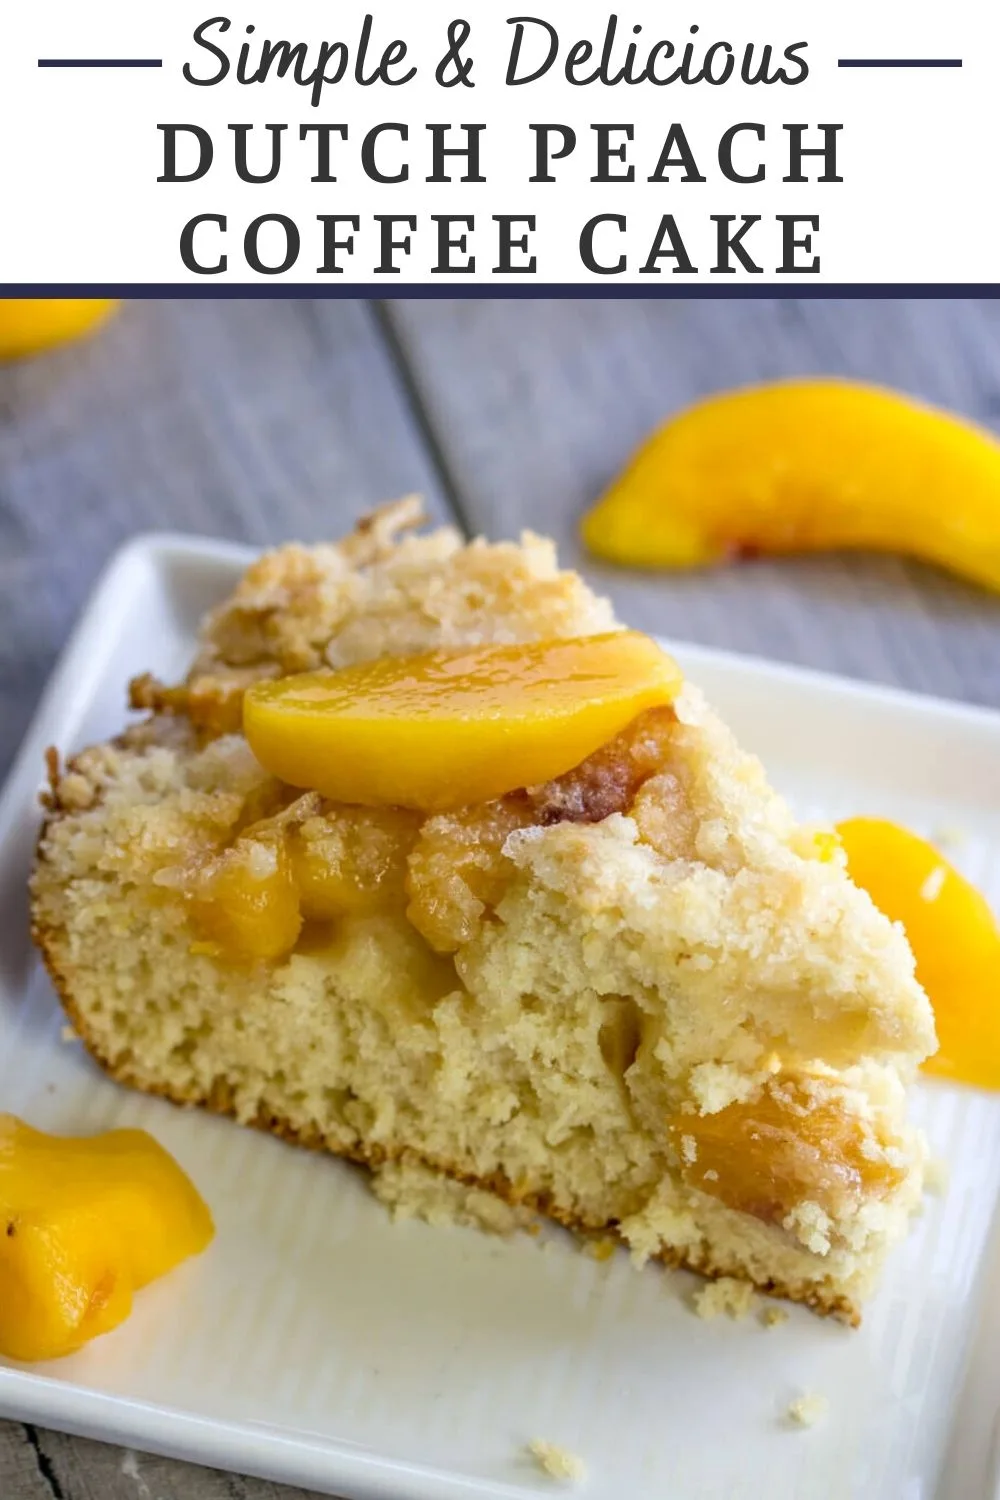 Dutch style peach breakfast cake uses fresh or frozen peaches topped with a buttery crumb to make a delicious coffee cake style treat. It's an classic recipe that will quickly become a an all time favorite for breakfast, tea time or a simple dessert.